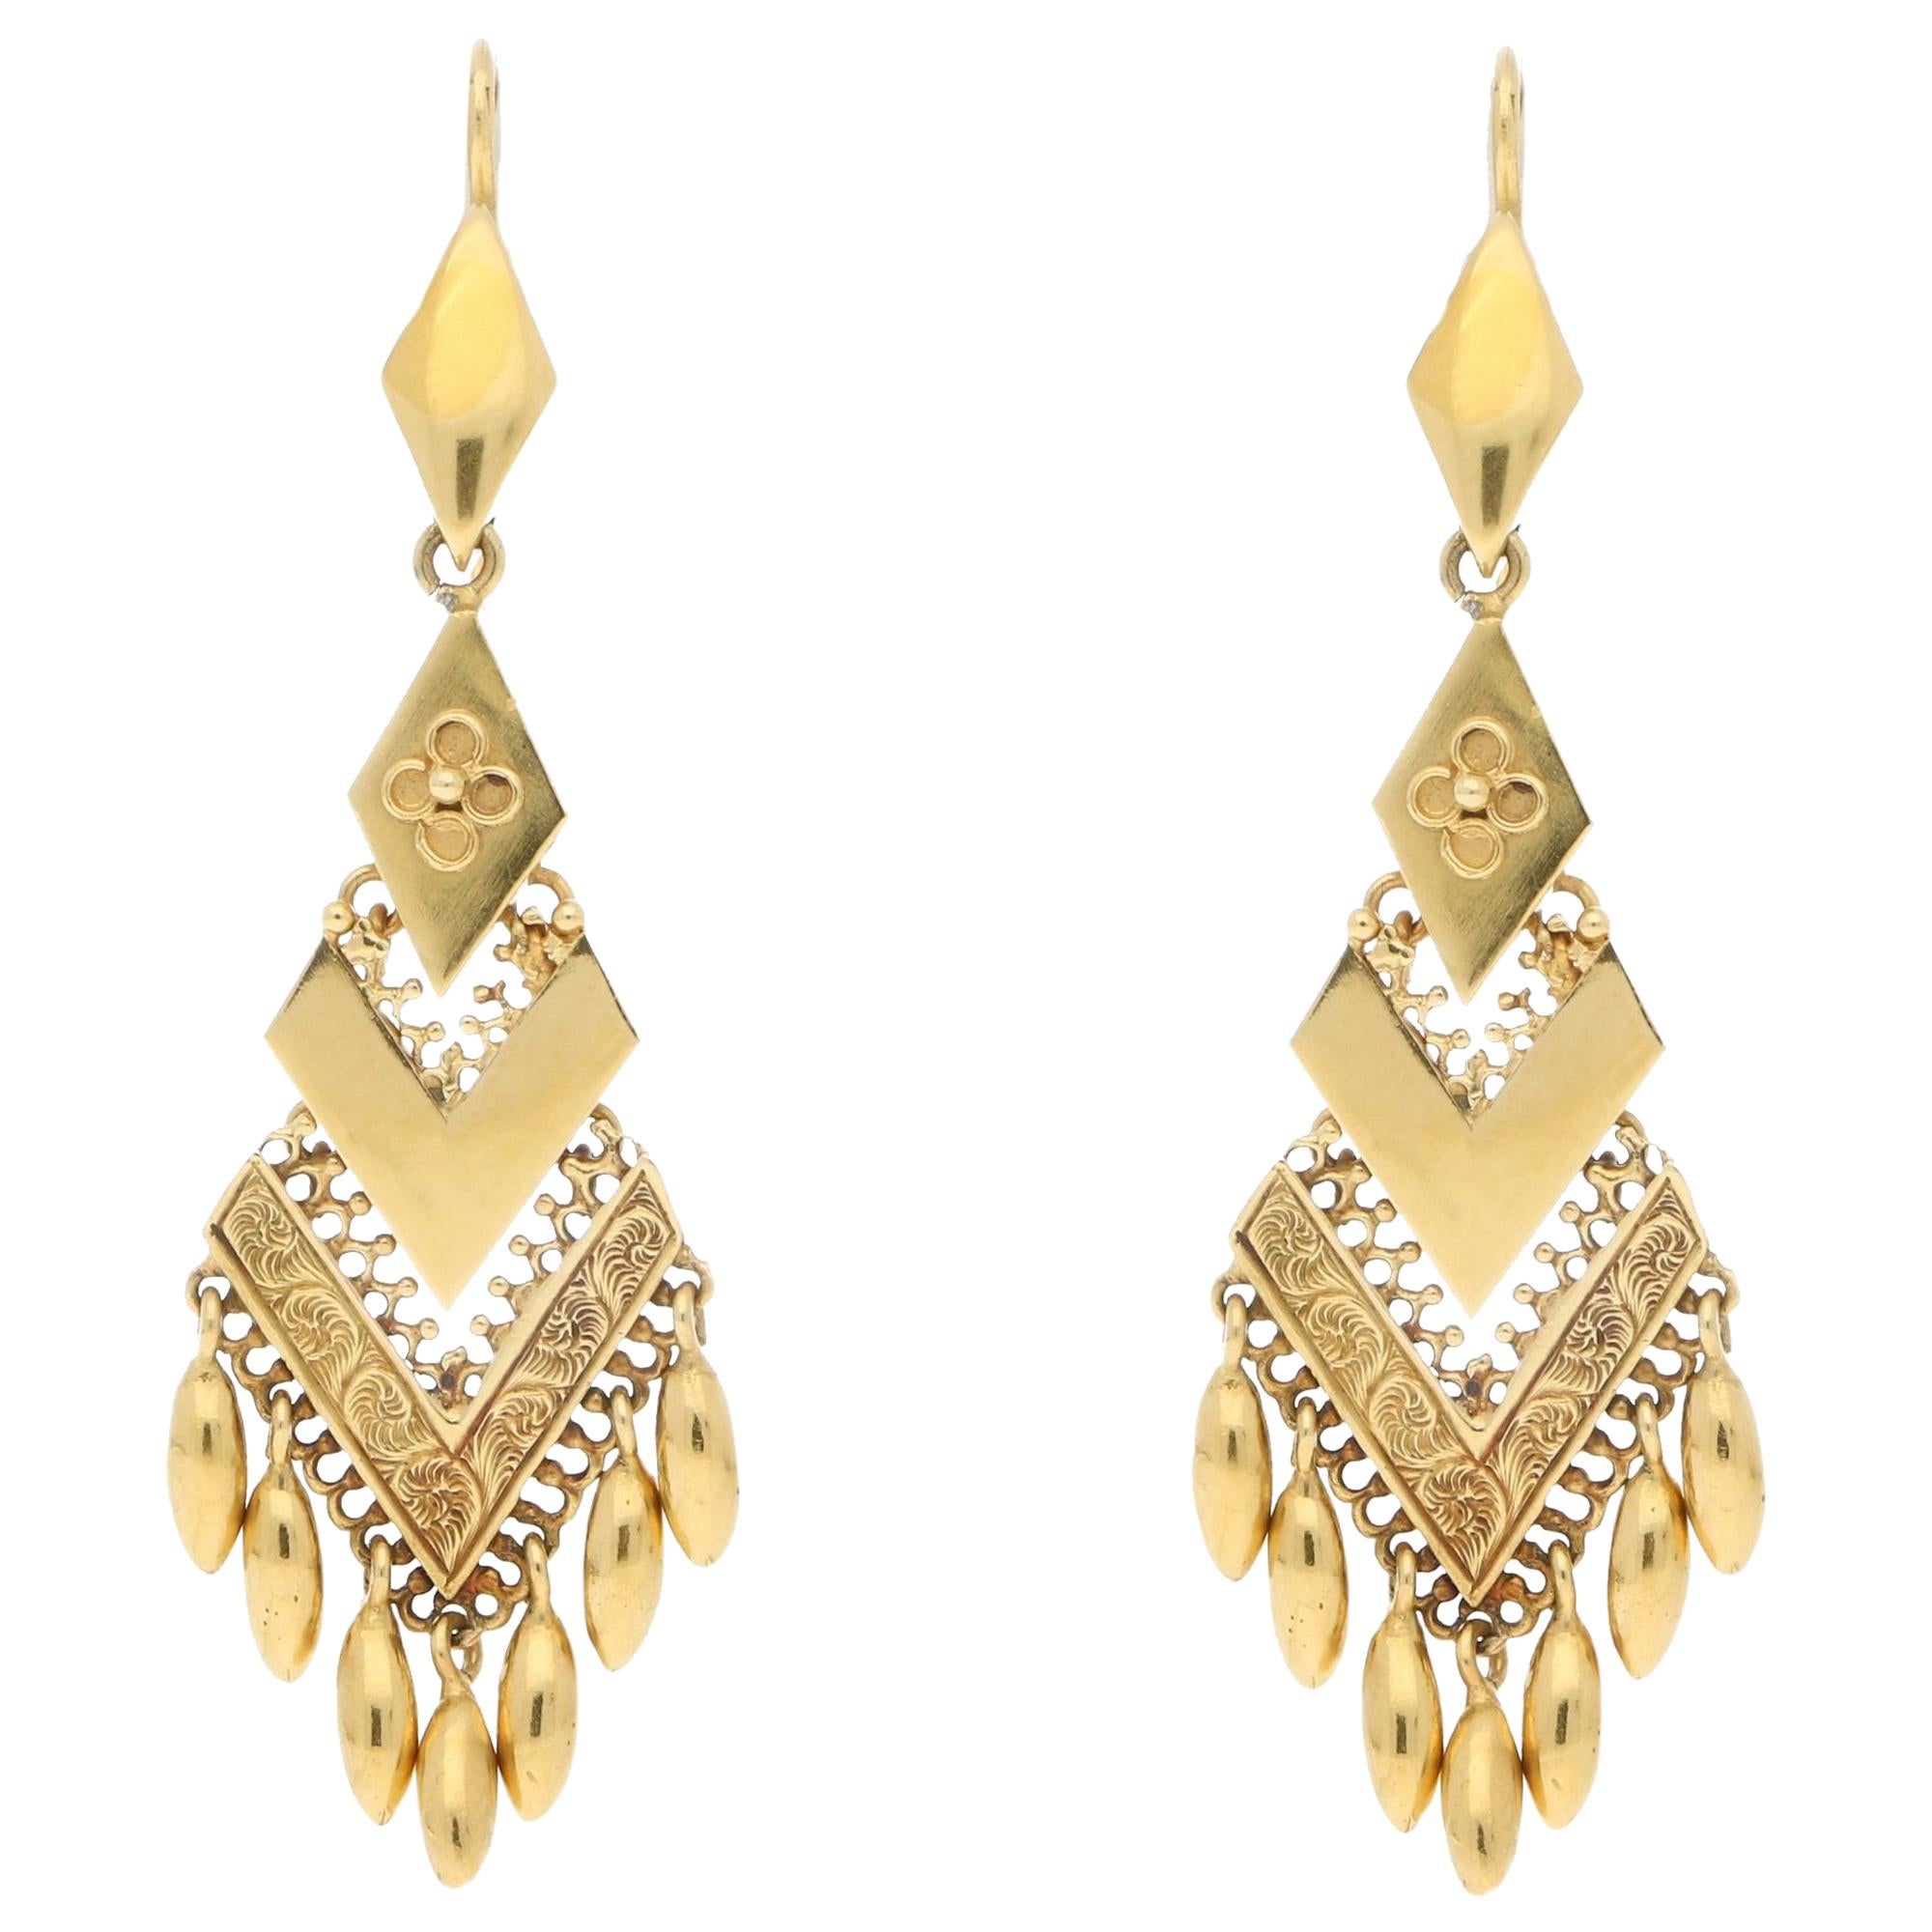 Victorian Etruscan Style Drop Earrings Made of Solid 18 Karat Yellow Gold